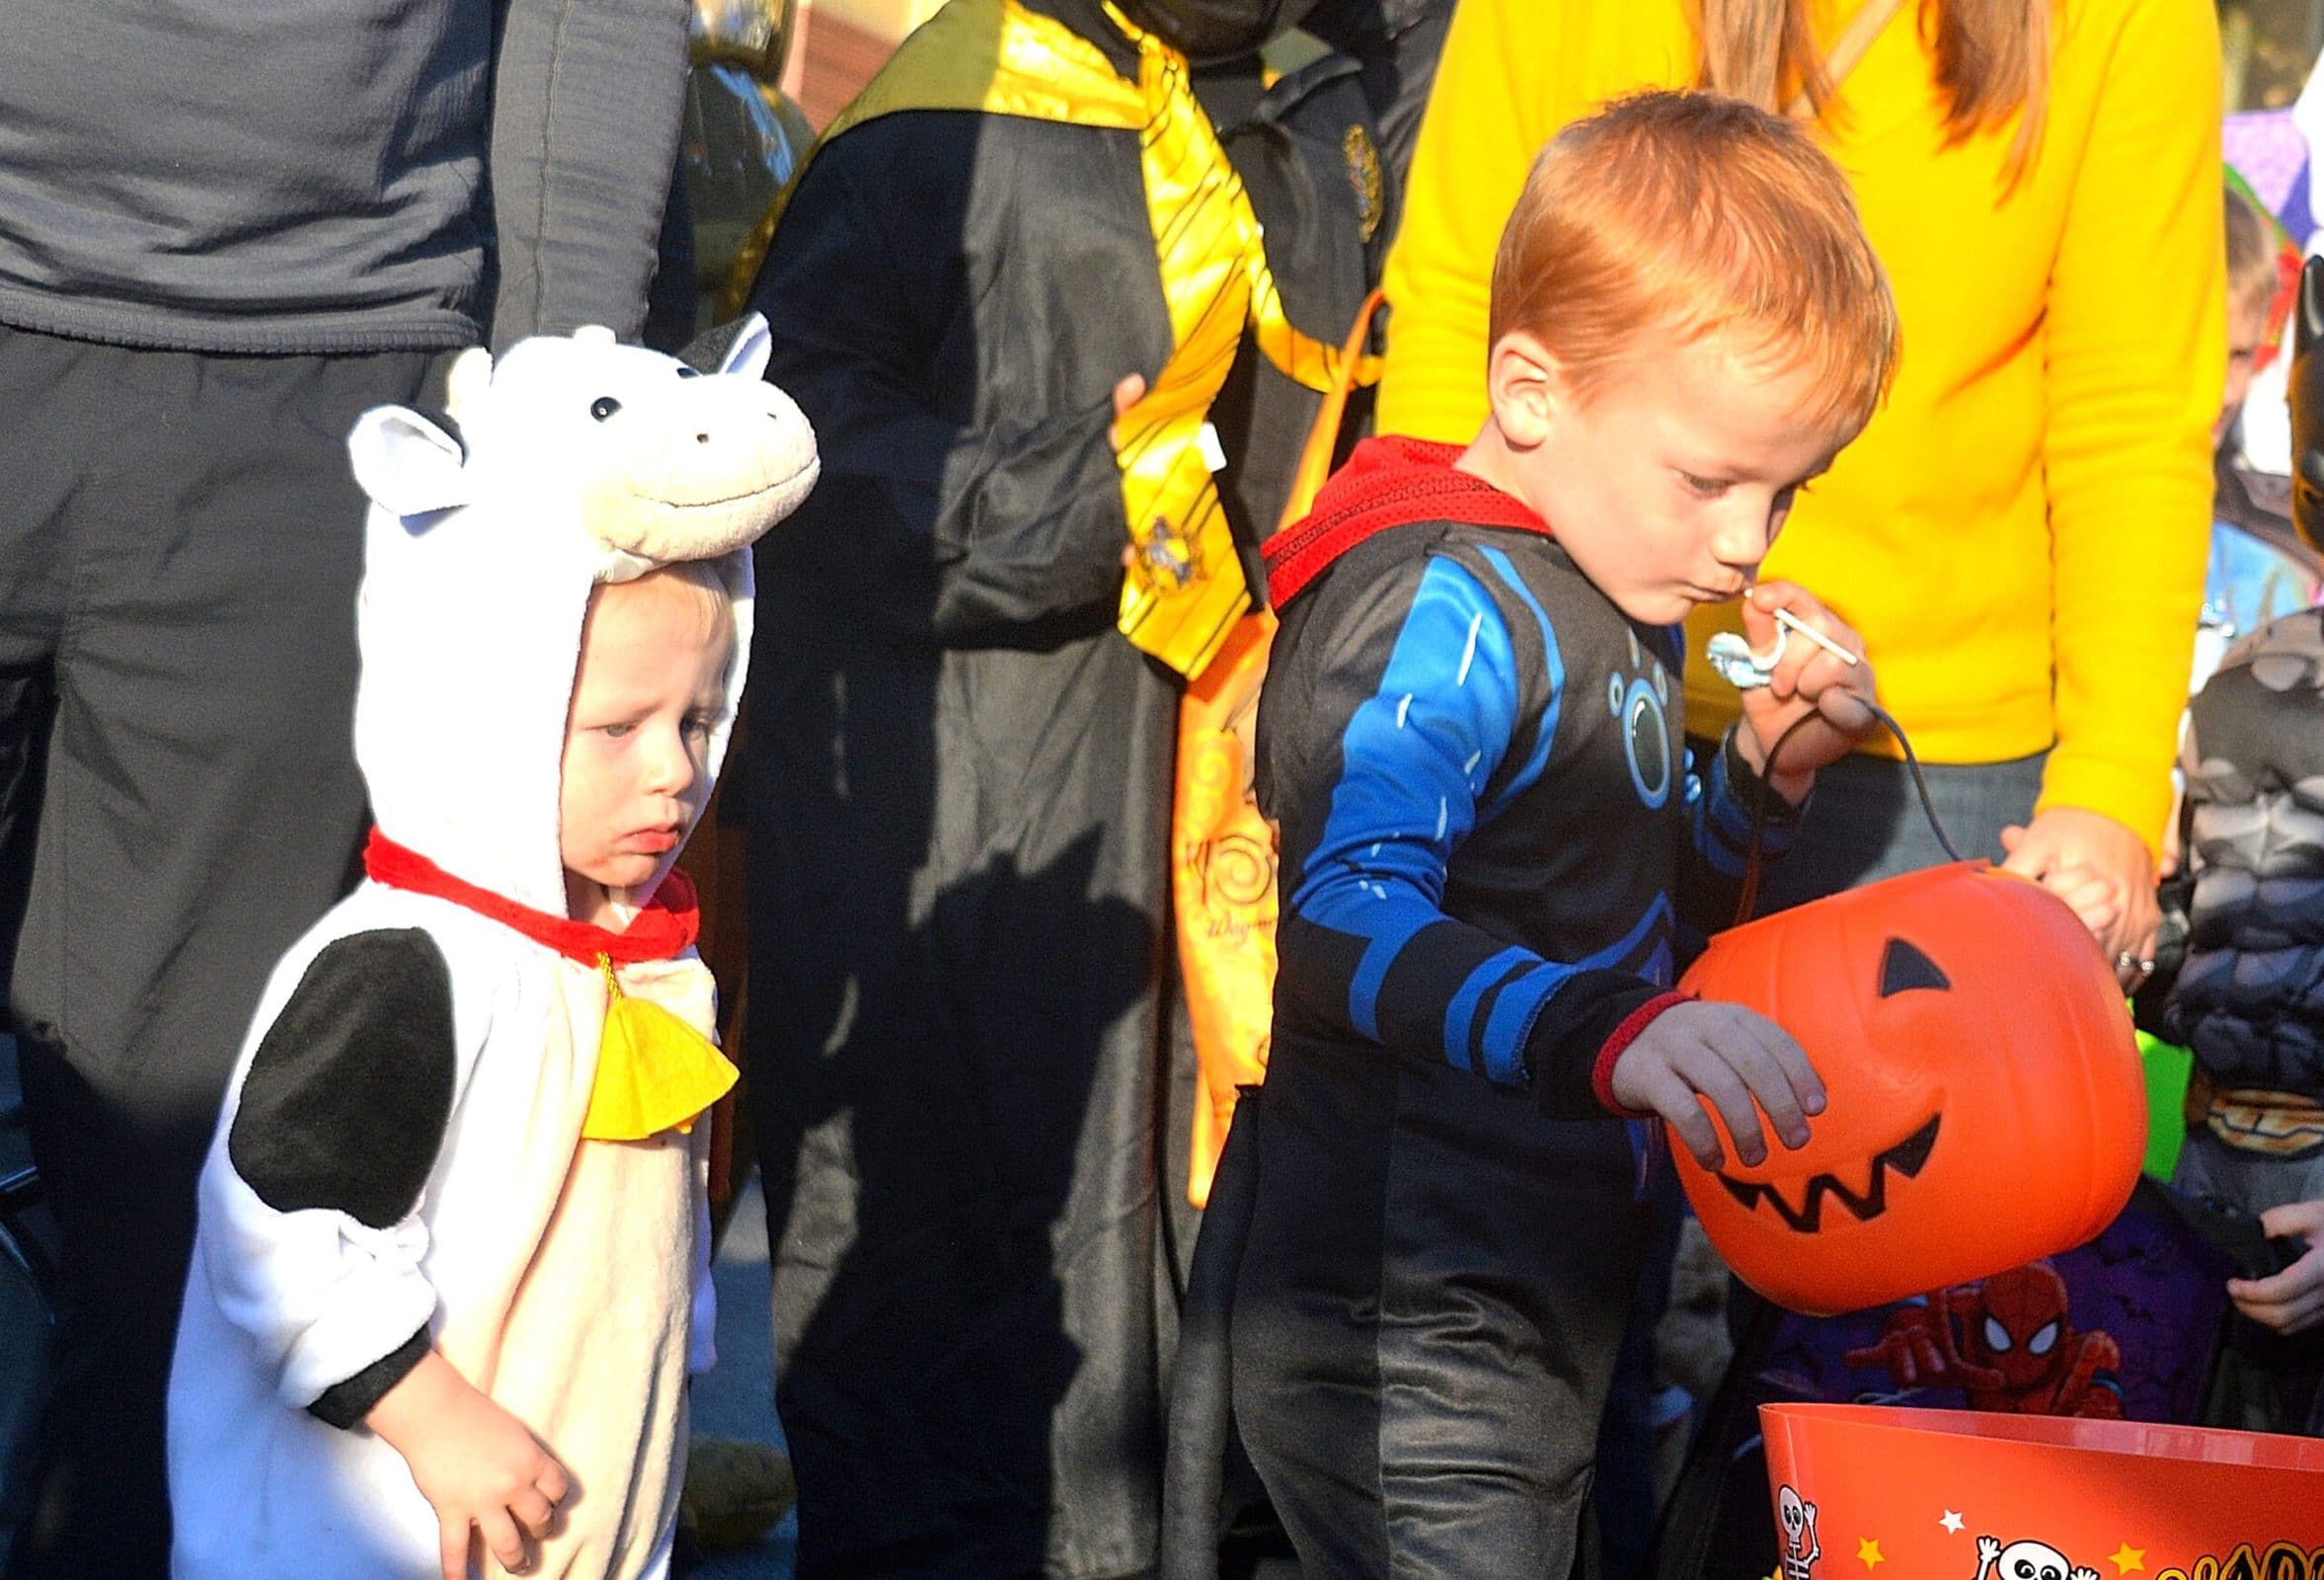 The Macknair brothers – Lucas, 1, costumed as a cow, and Gabriel, 5, as a “Wild Kratts” character from the PBS animated series – get treats from the trunk of the Southborough Police Department.